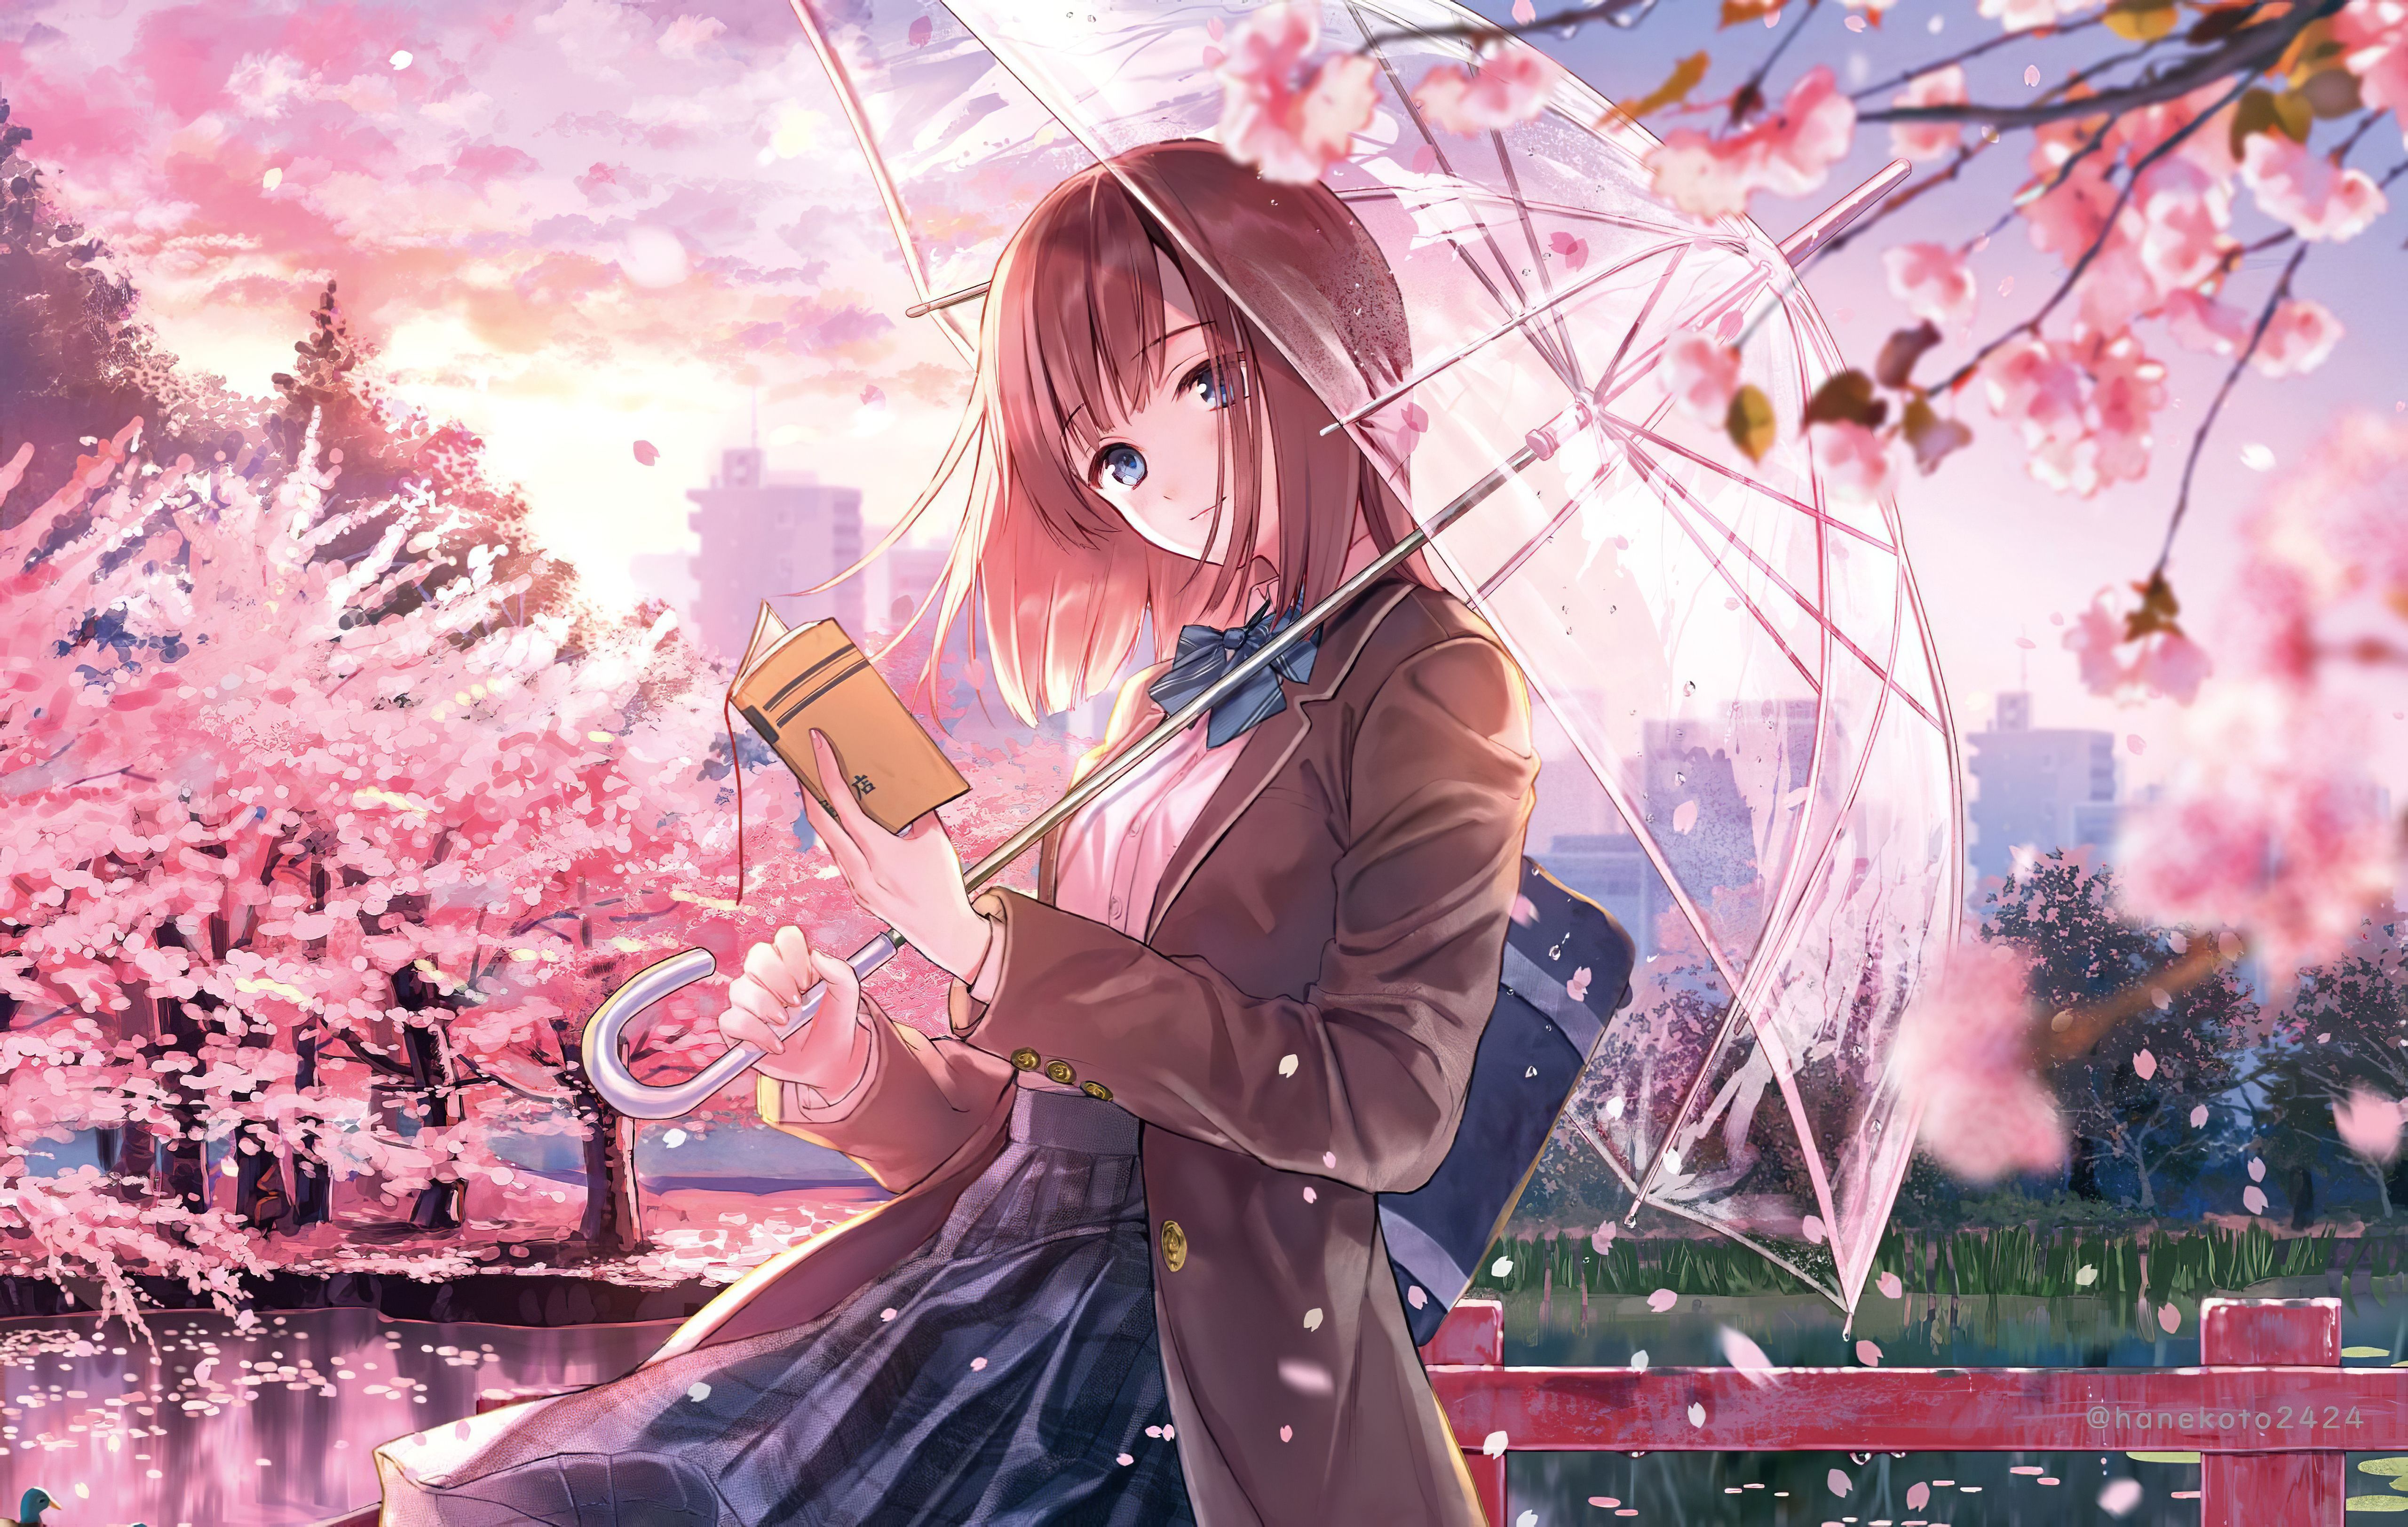 Anime Girl Wallpapers Anime Cherry Blossom Backgrounds